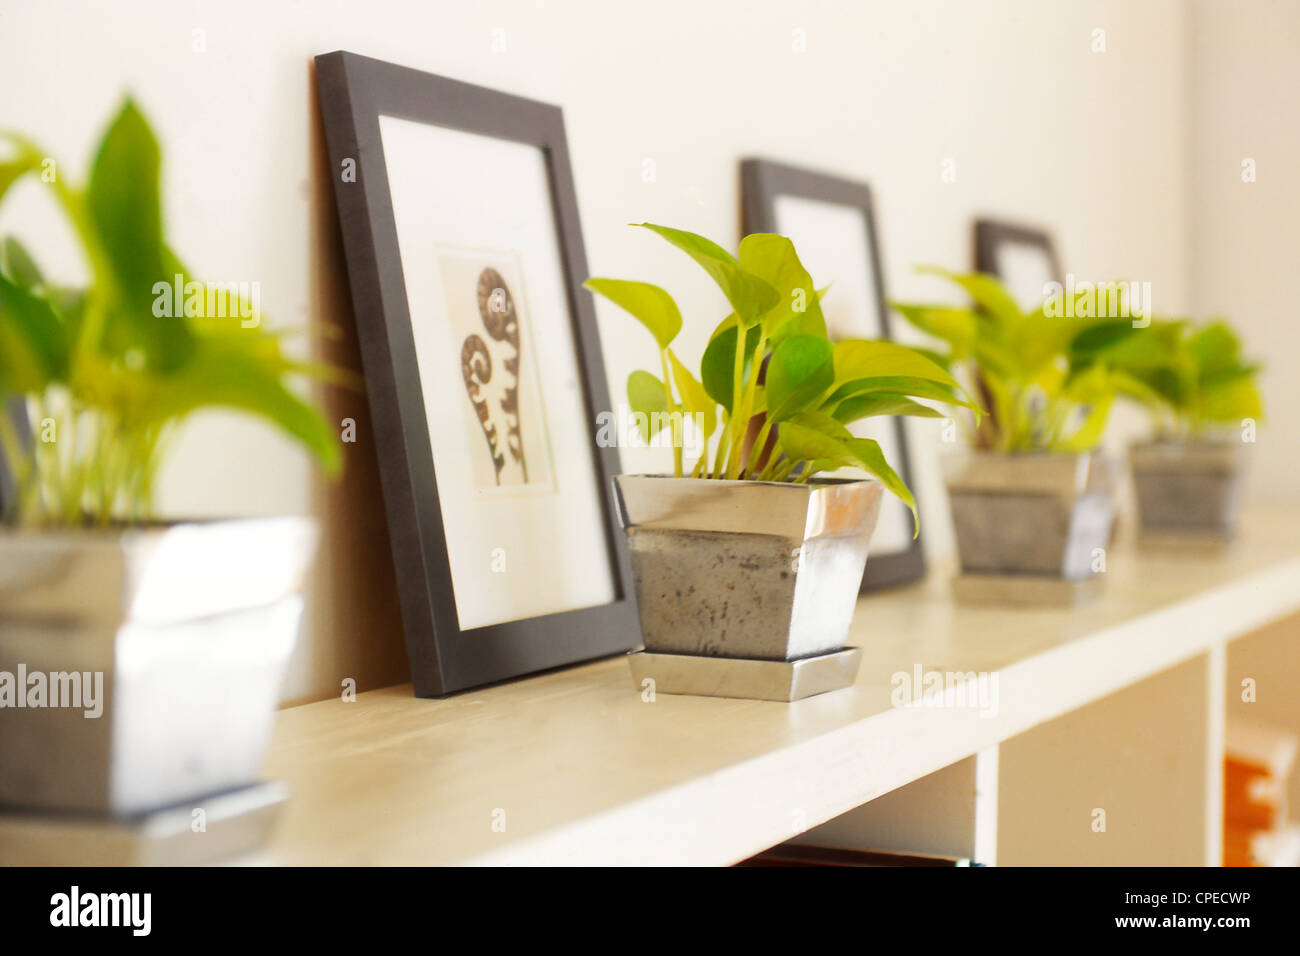 Potted Plants And Frames In A Row Stock Photo